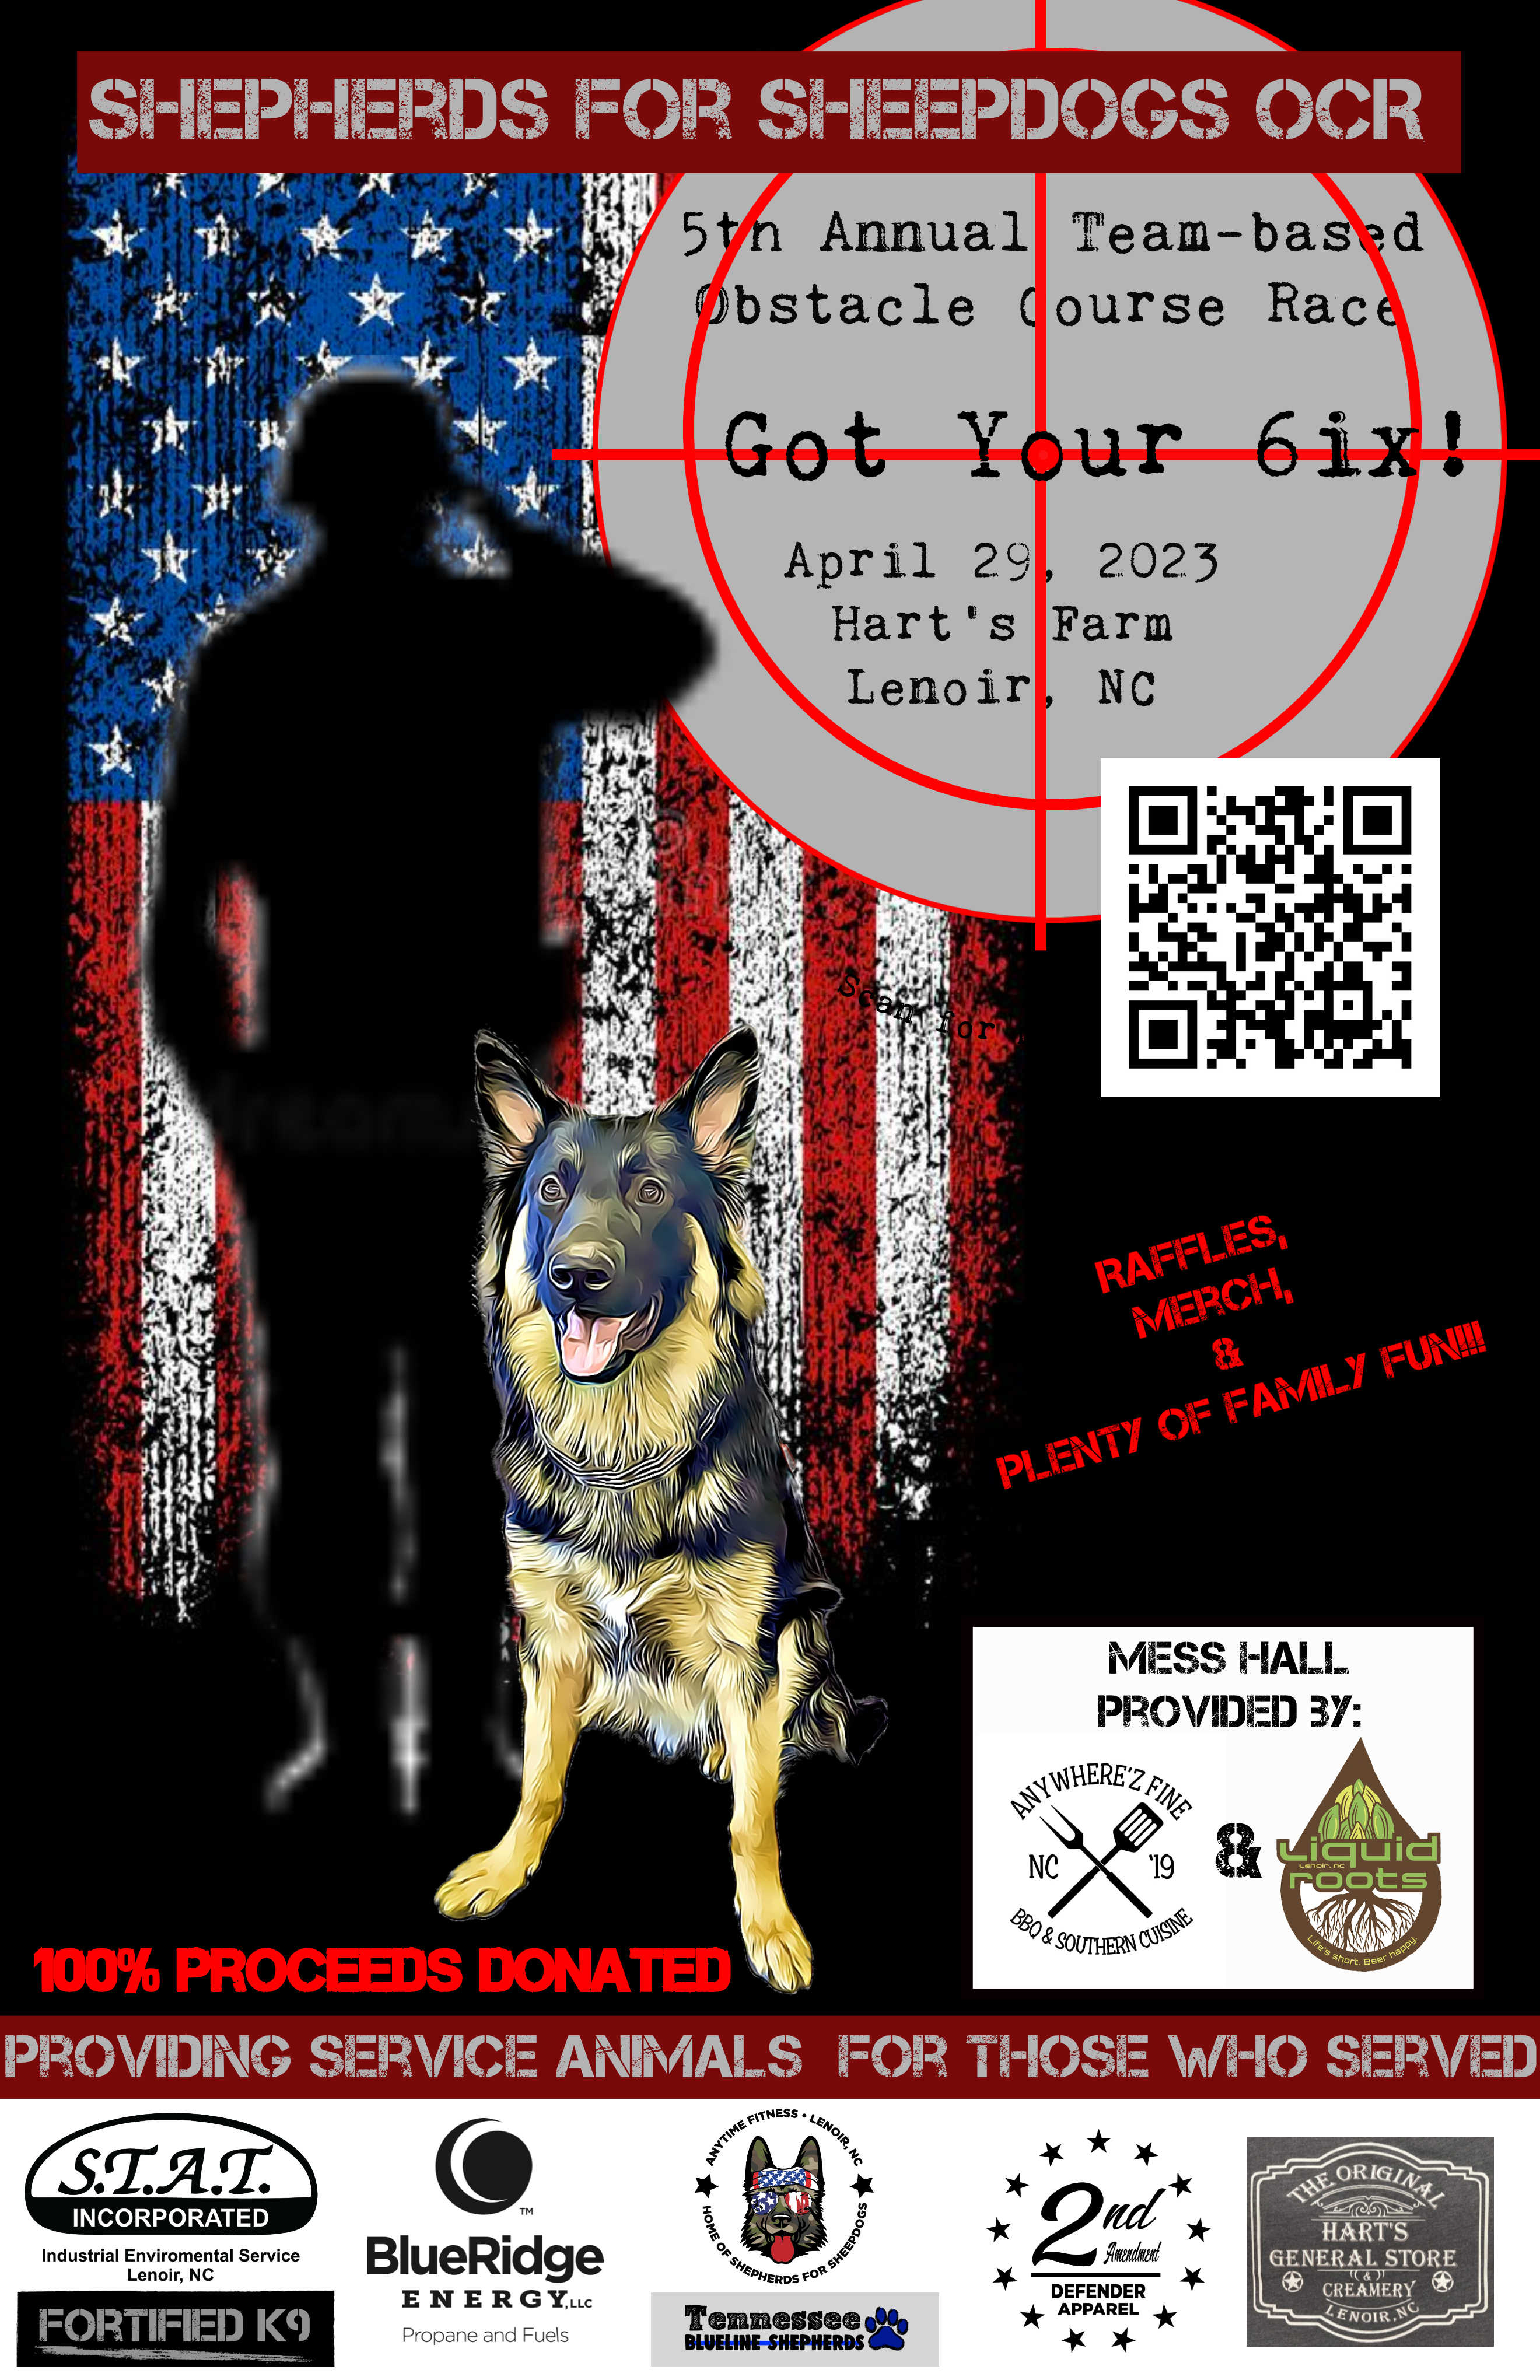 Image Flyer: Shepherds 4 Sheep Dogs - April 2023 Event